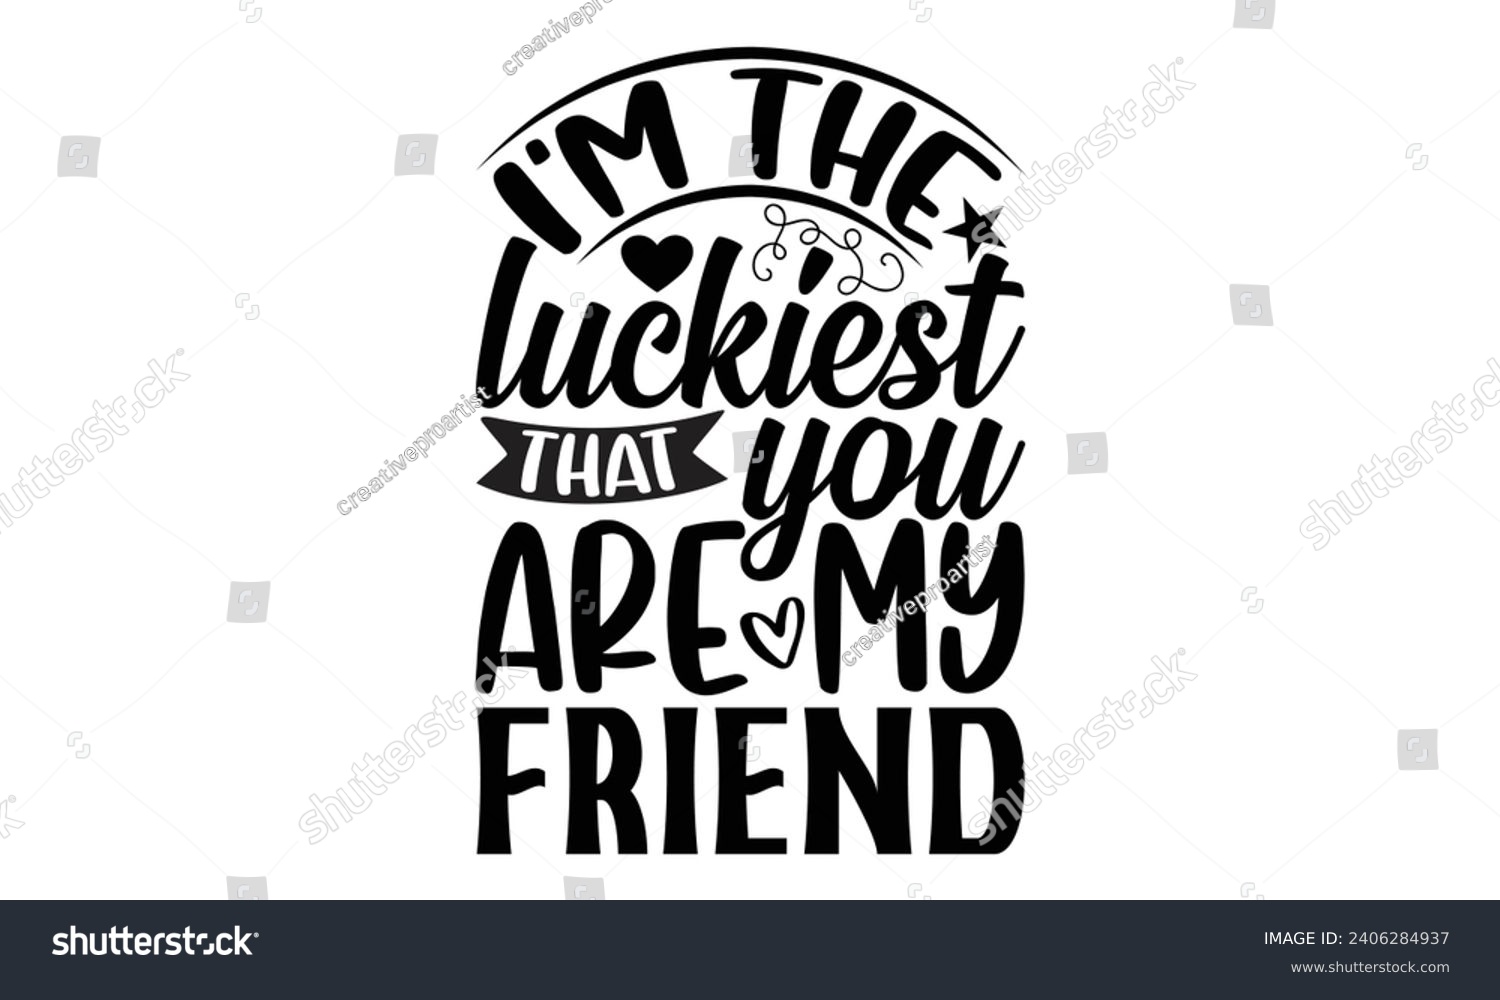 SVG of I'm The Luckiest That You Are My Friend- Best friends t- shirt design, Hand drawn lettering phrase, Illustration for prints on bags, posters, cards eps, Files for Cutting, Isolated on white background svg